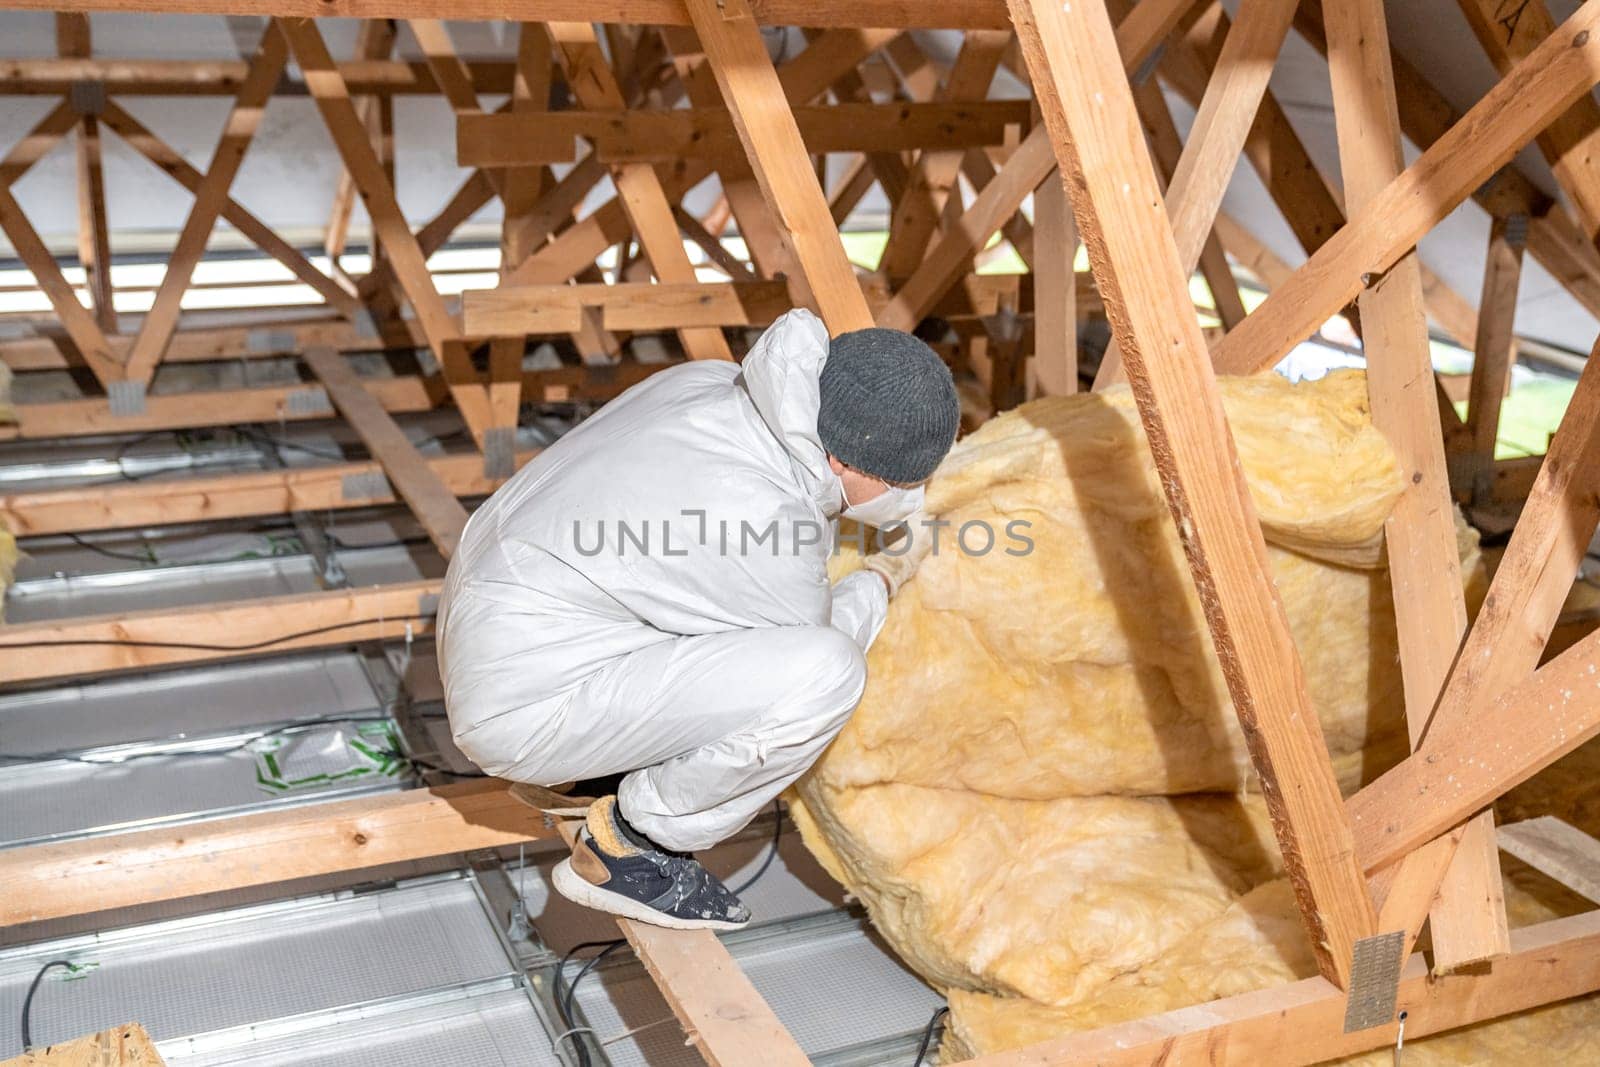 thermal insulation of roof spaces.